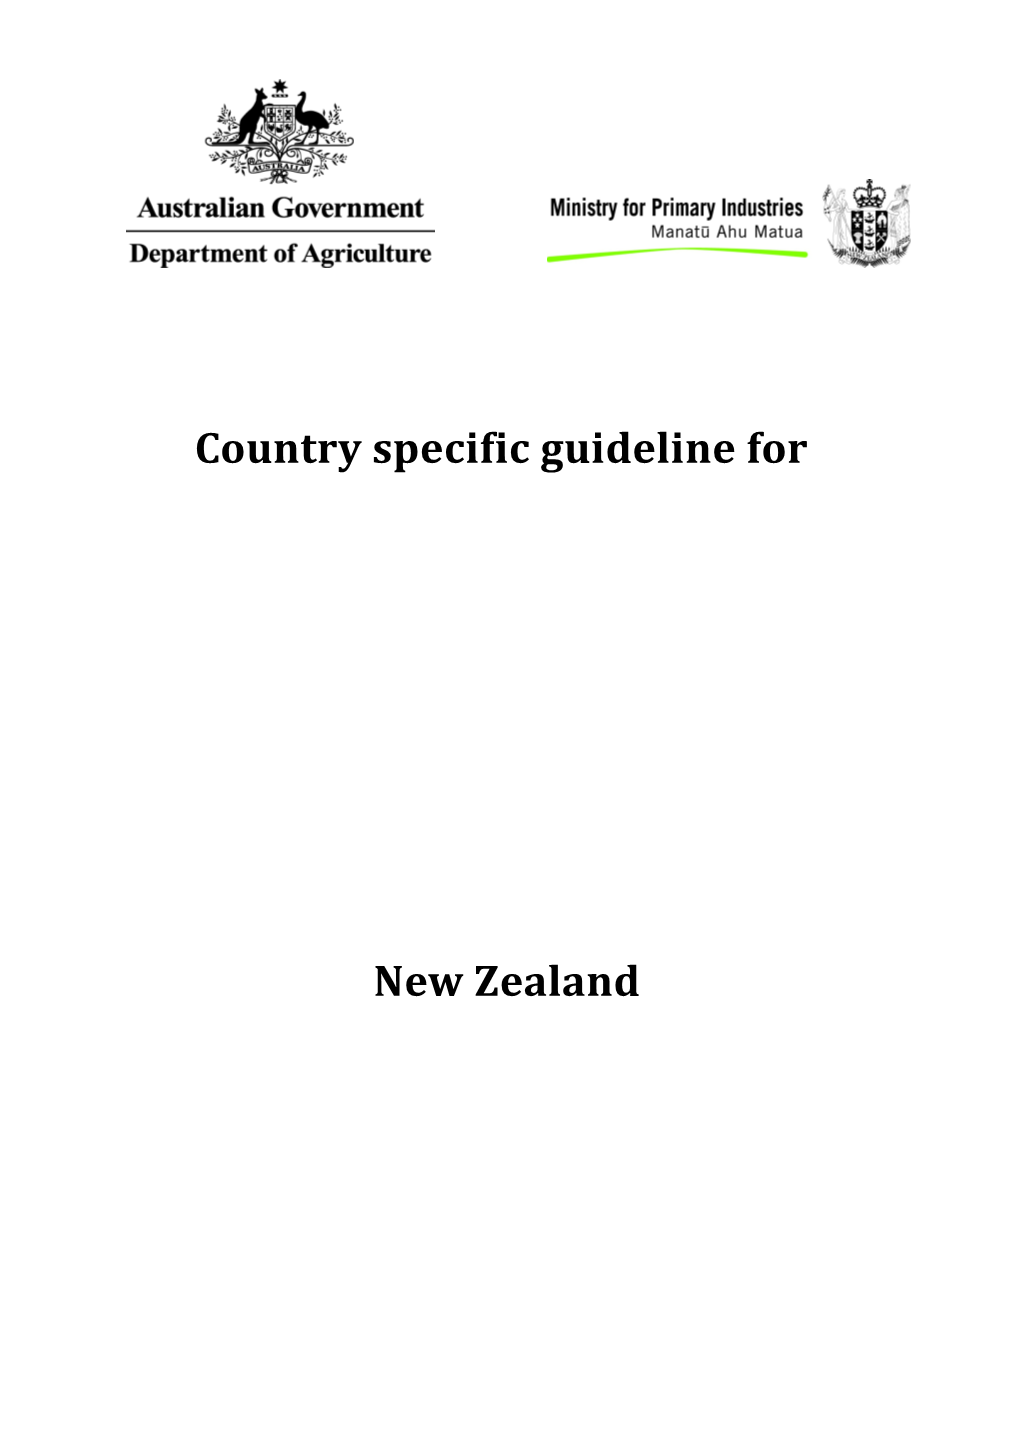 Country Specific Guidelinefor New Zealand